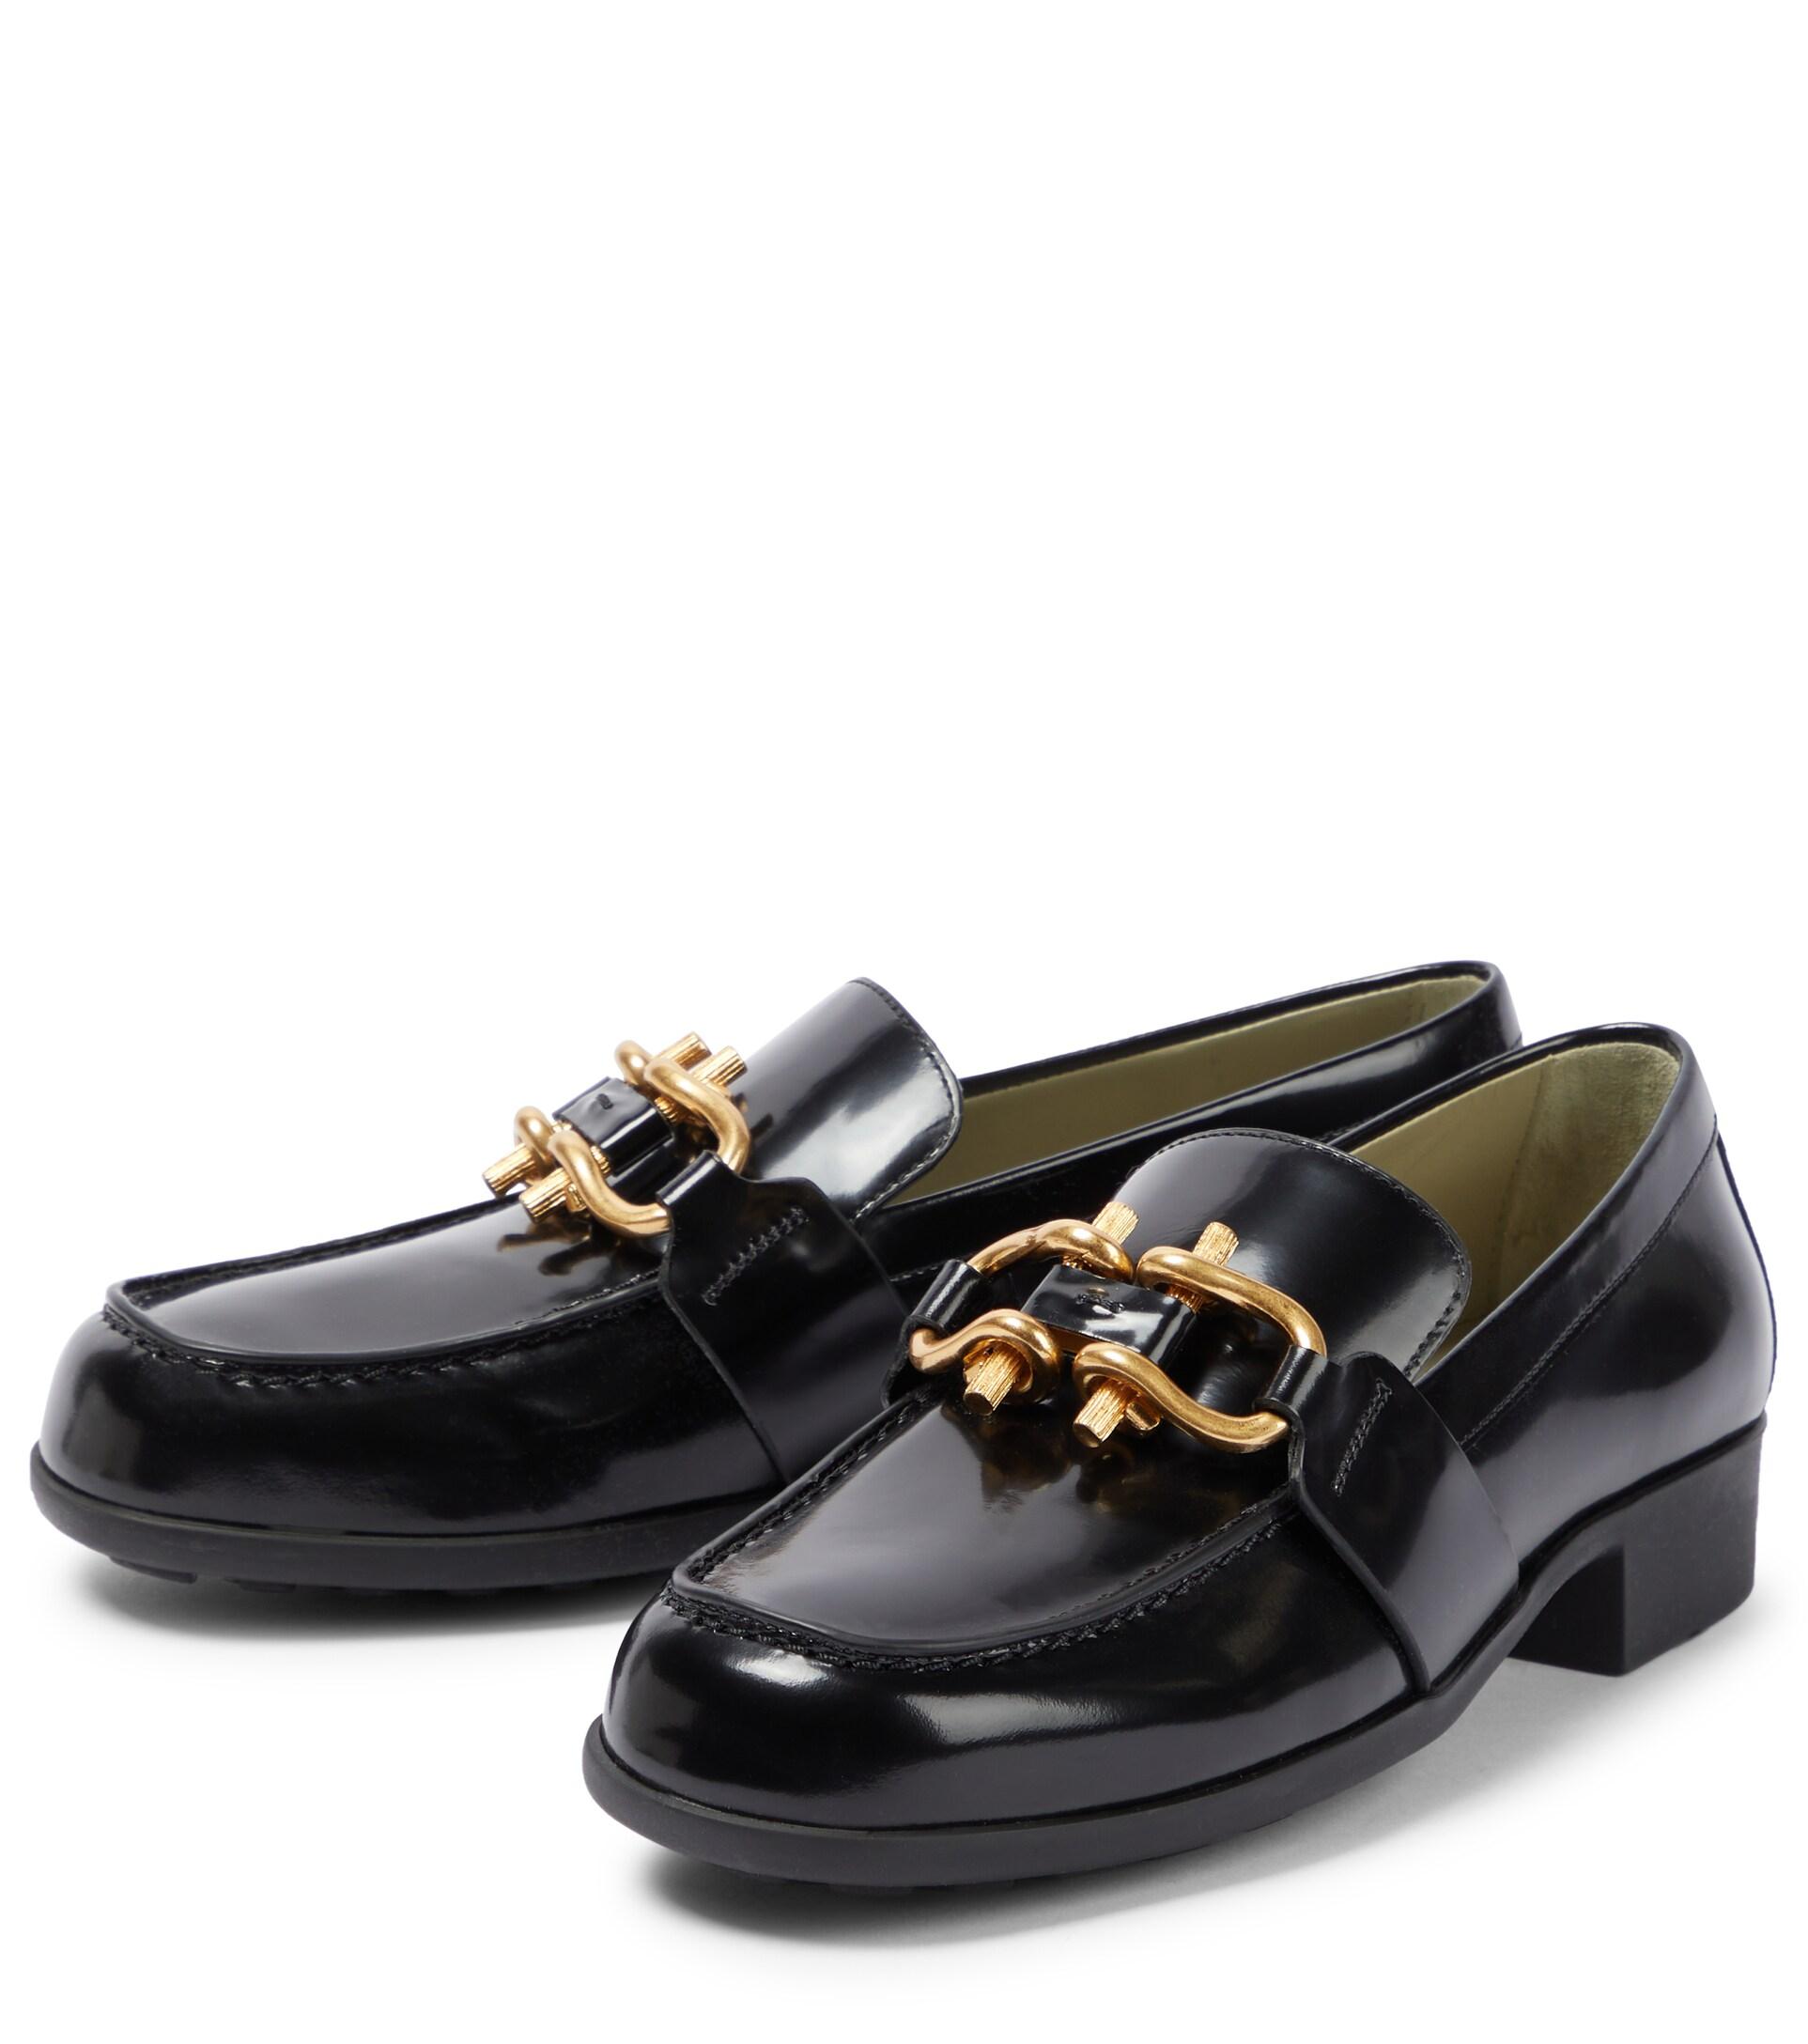 Womens Shoes Flats and flat shoes Loafers and moccasins Bottega Veneta Embellished Patent-leather Loafers in Black 